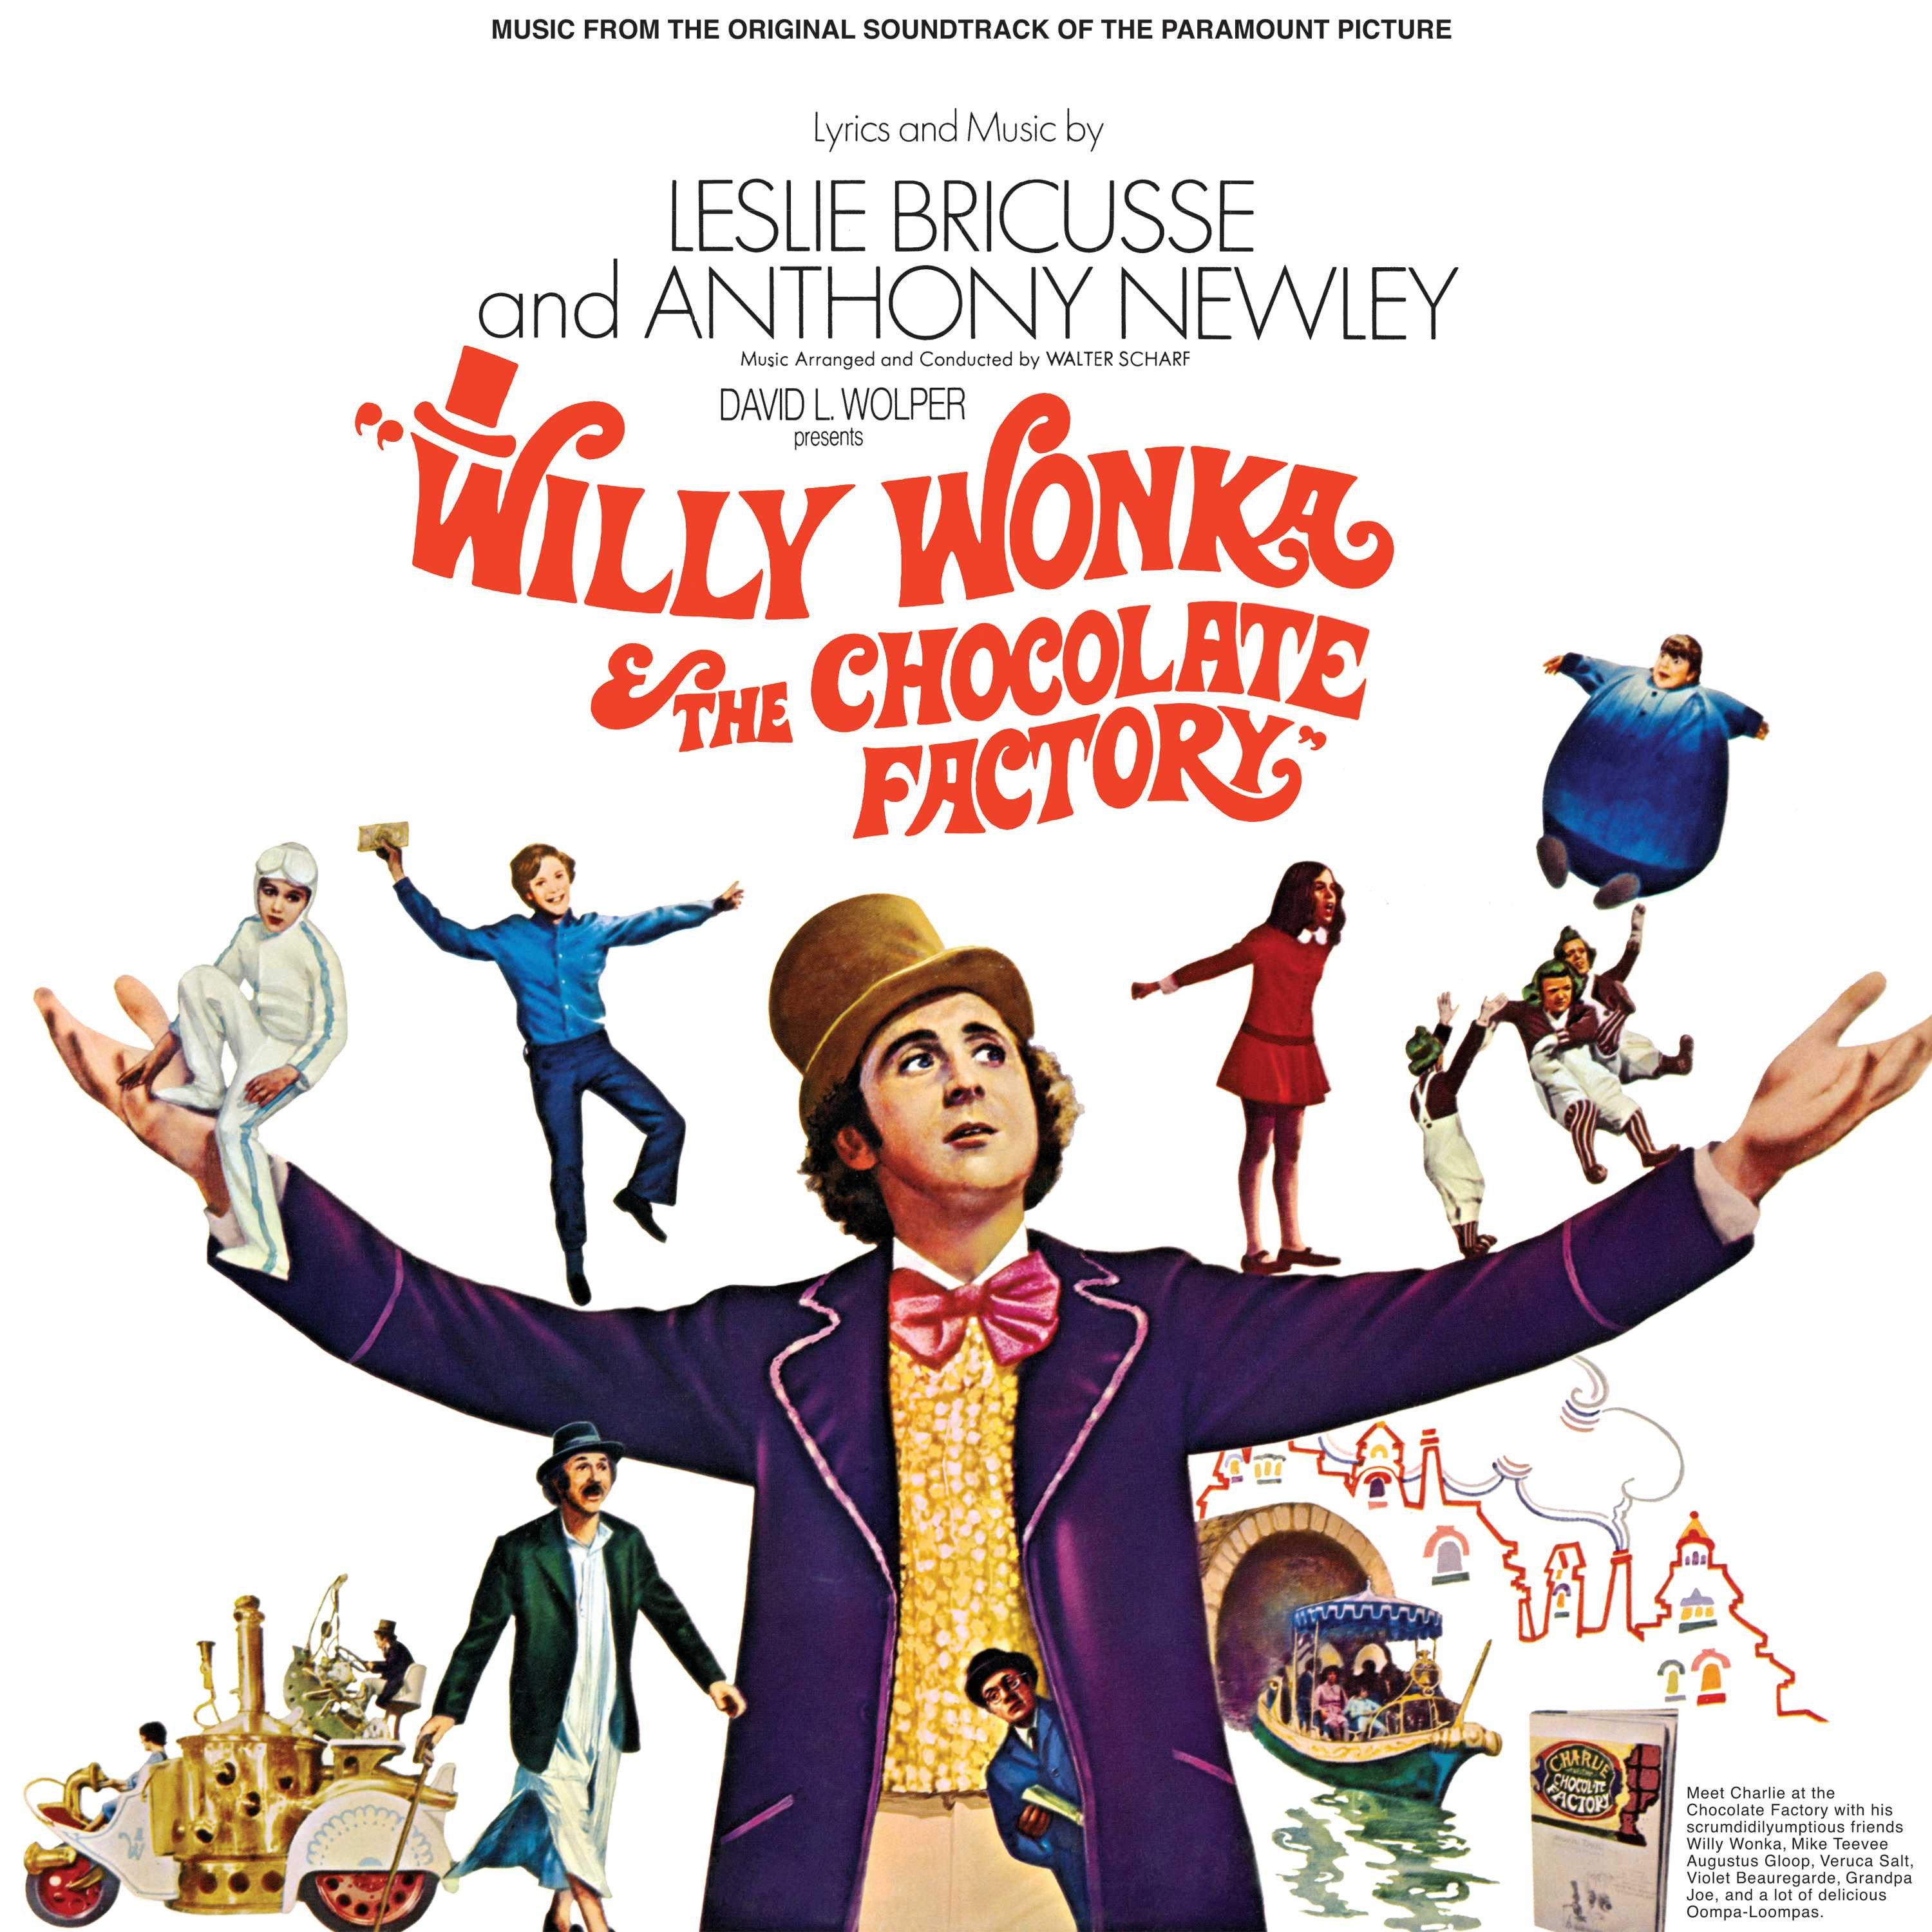 Various Artists - Willy Wonka & The Chocolate Factory : Music From The Original Soundtrack Of The Paramount Picture LP